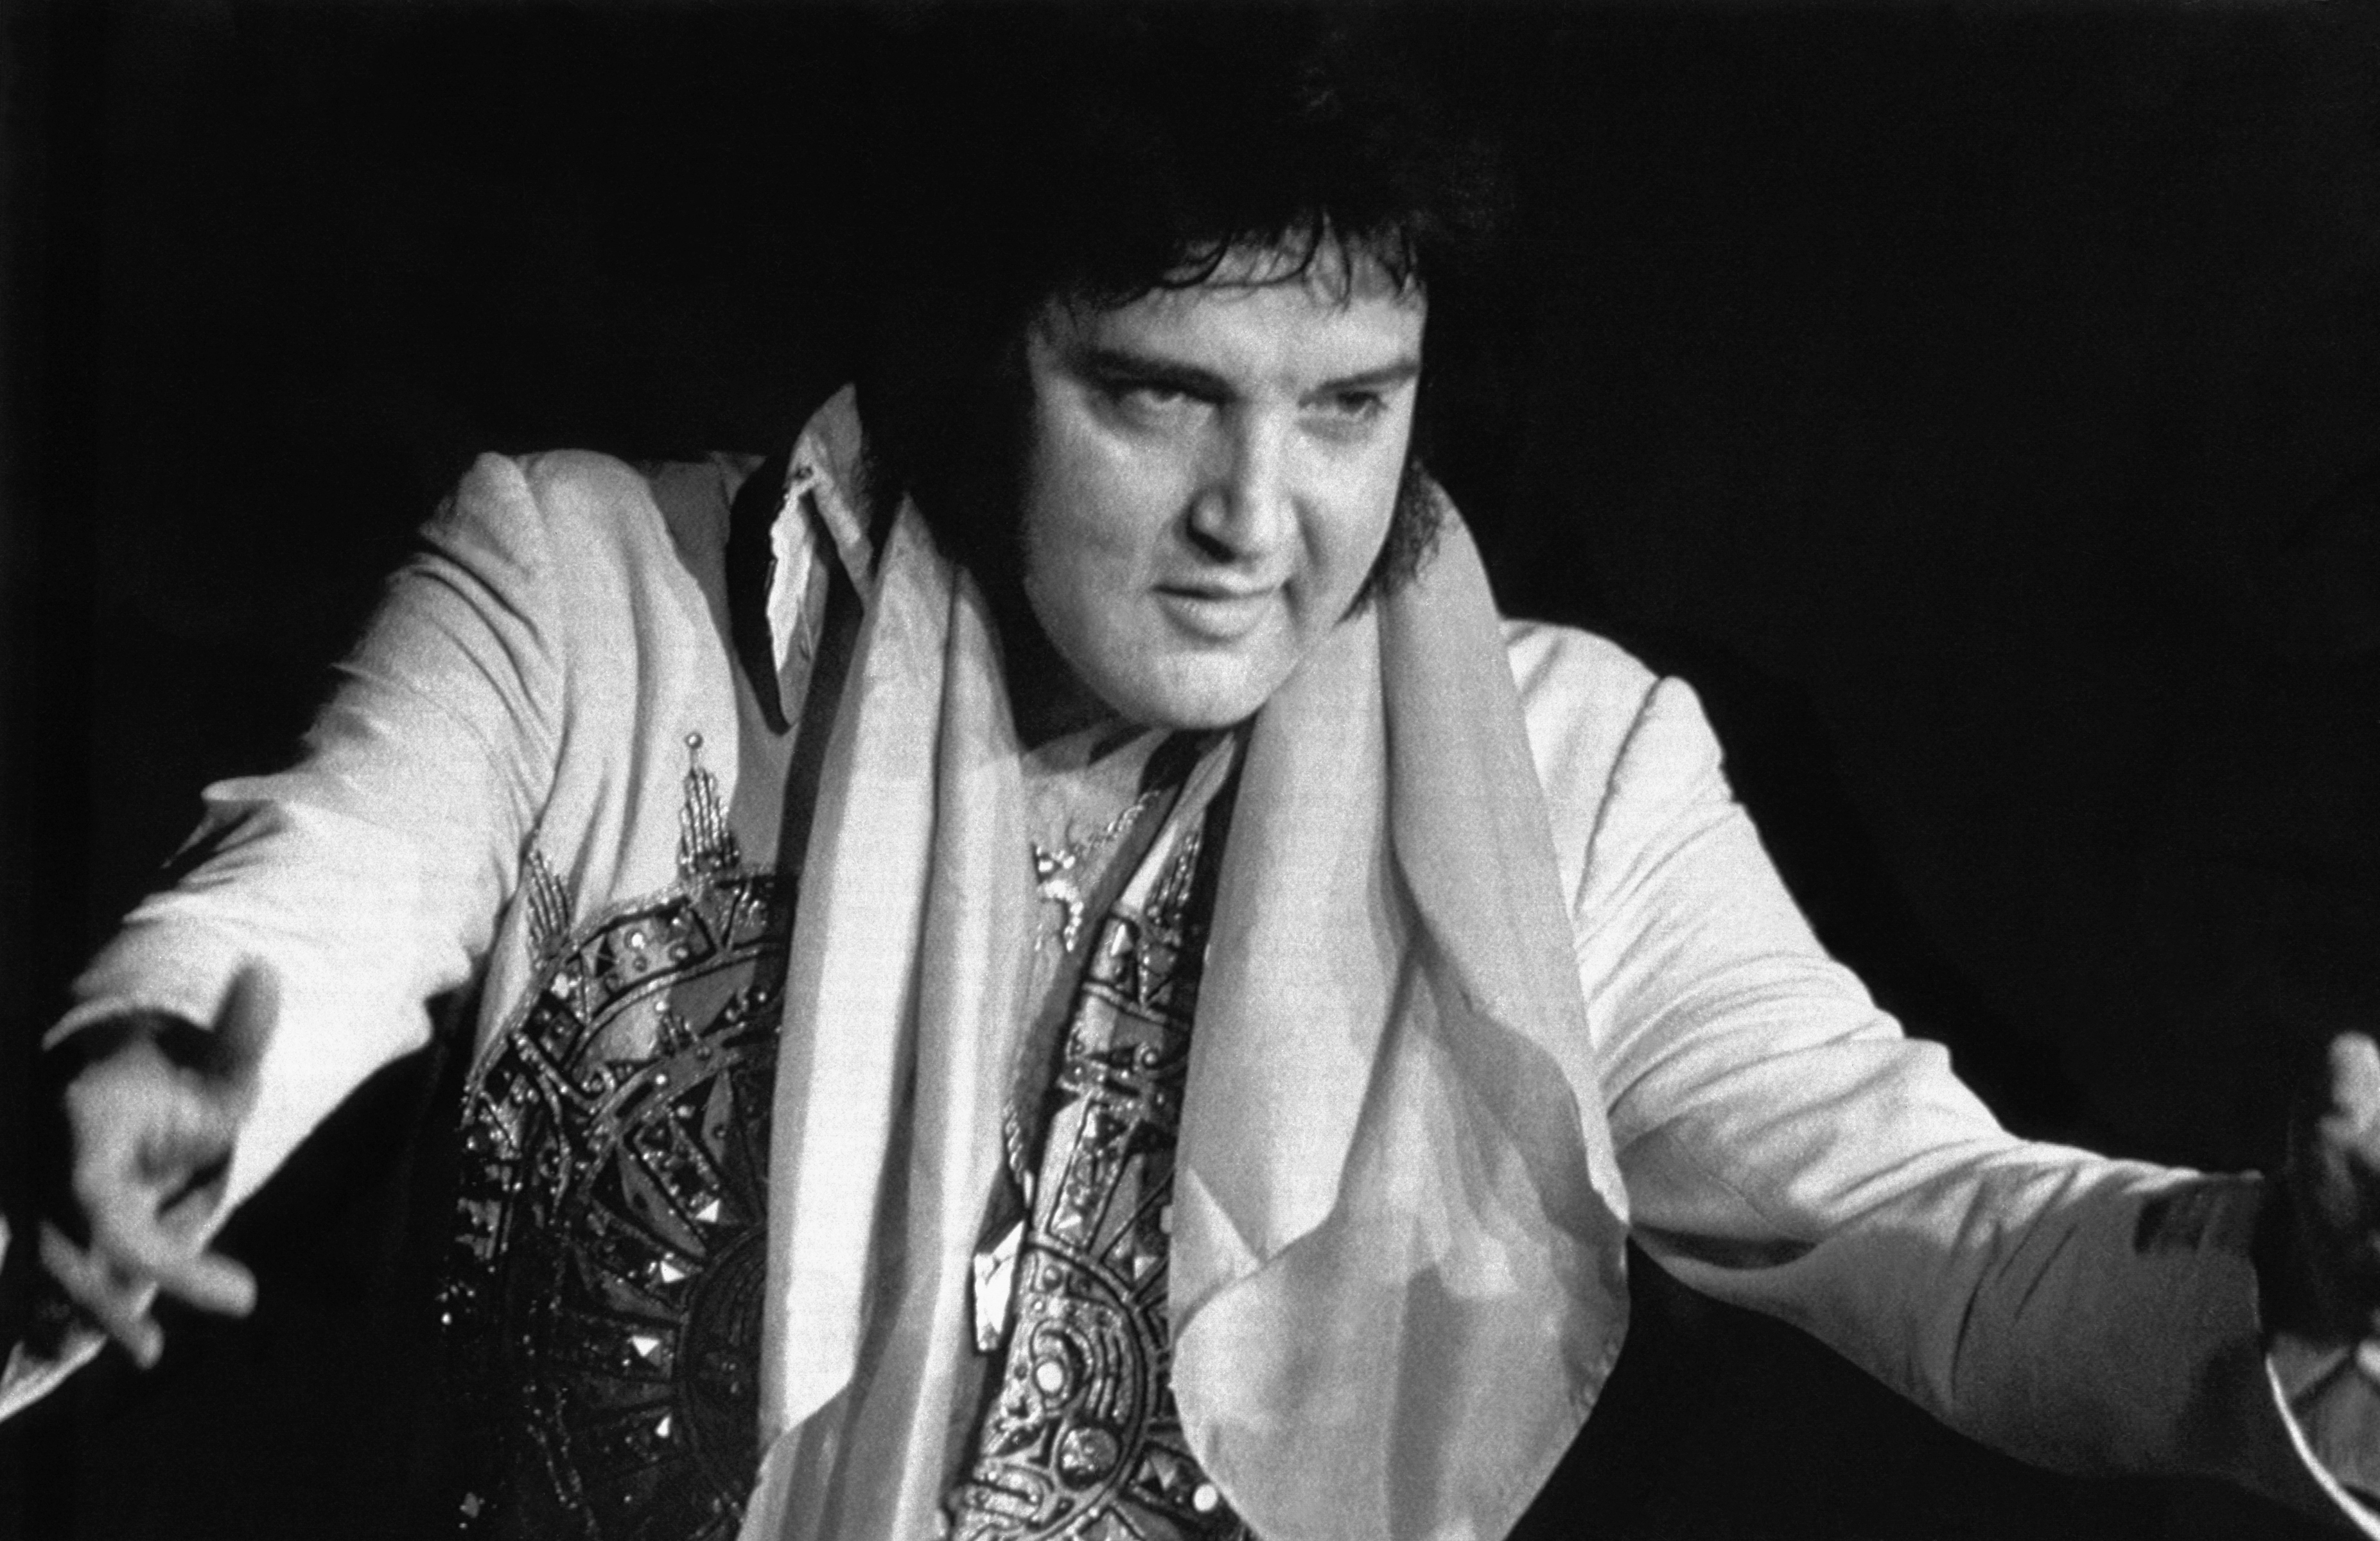 Elvis Presley performing live on stage in 1977 | Source: Getty Images